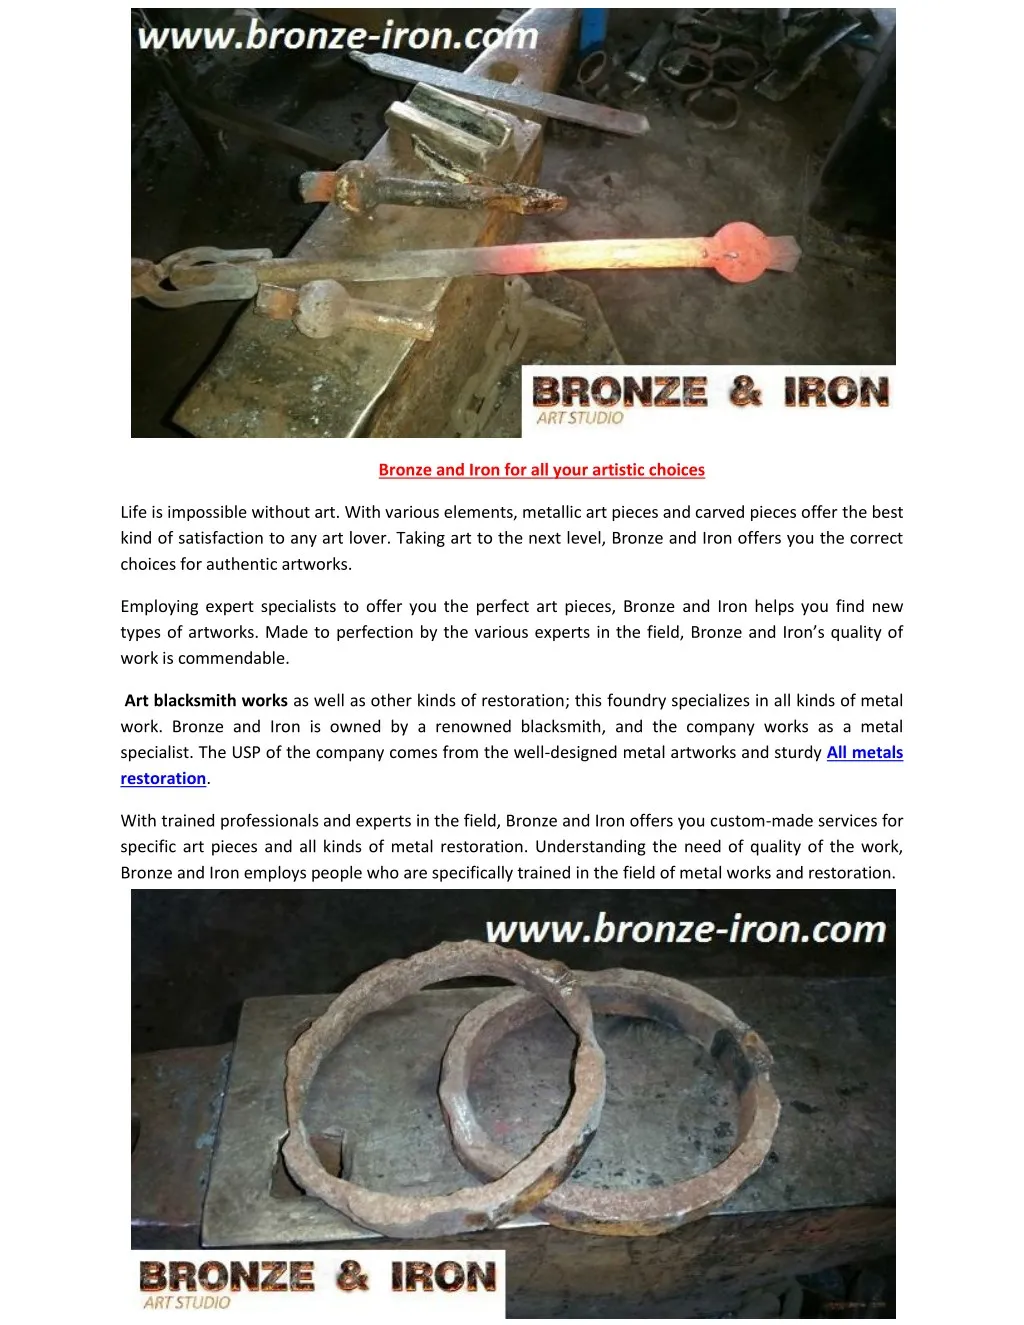 bronze and iron for all your artistic choices